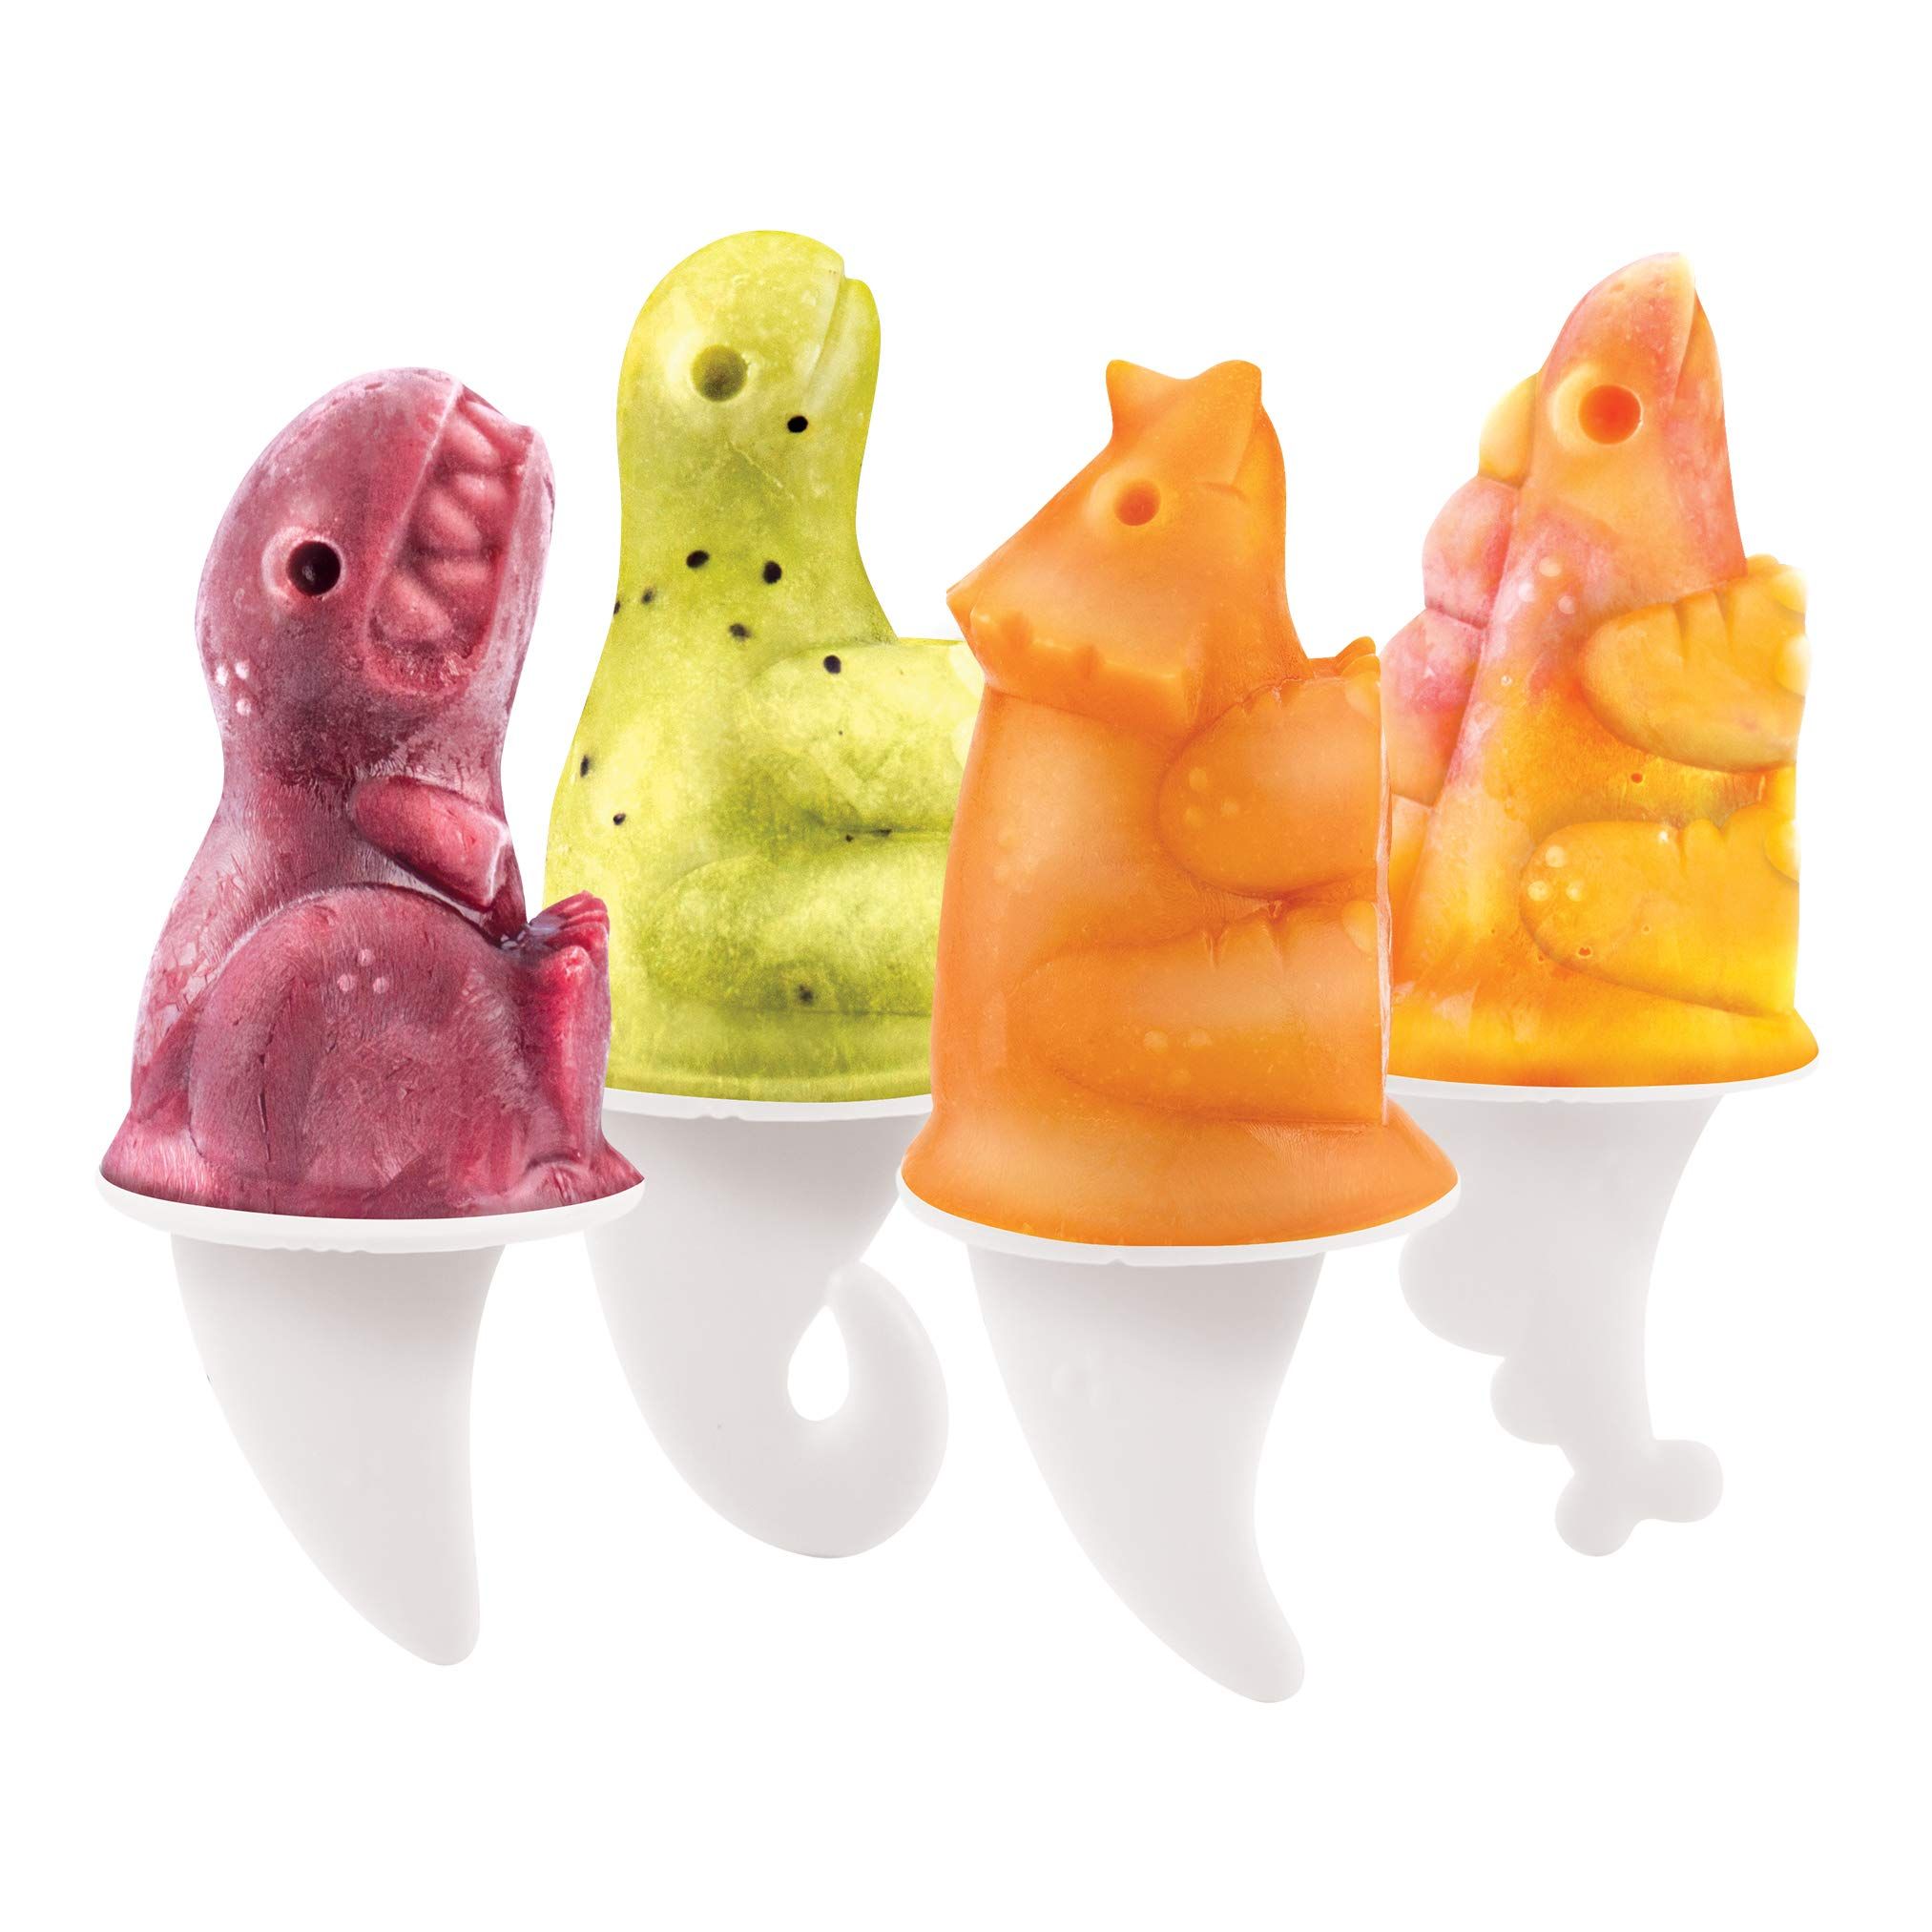  Miaowoof Homemade Popsicles Molds, Silicone Ice